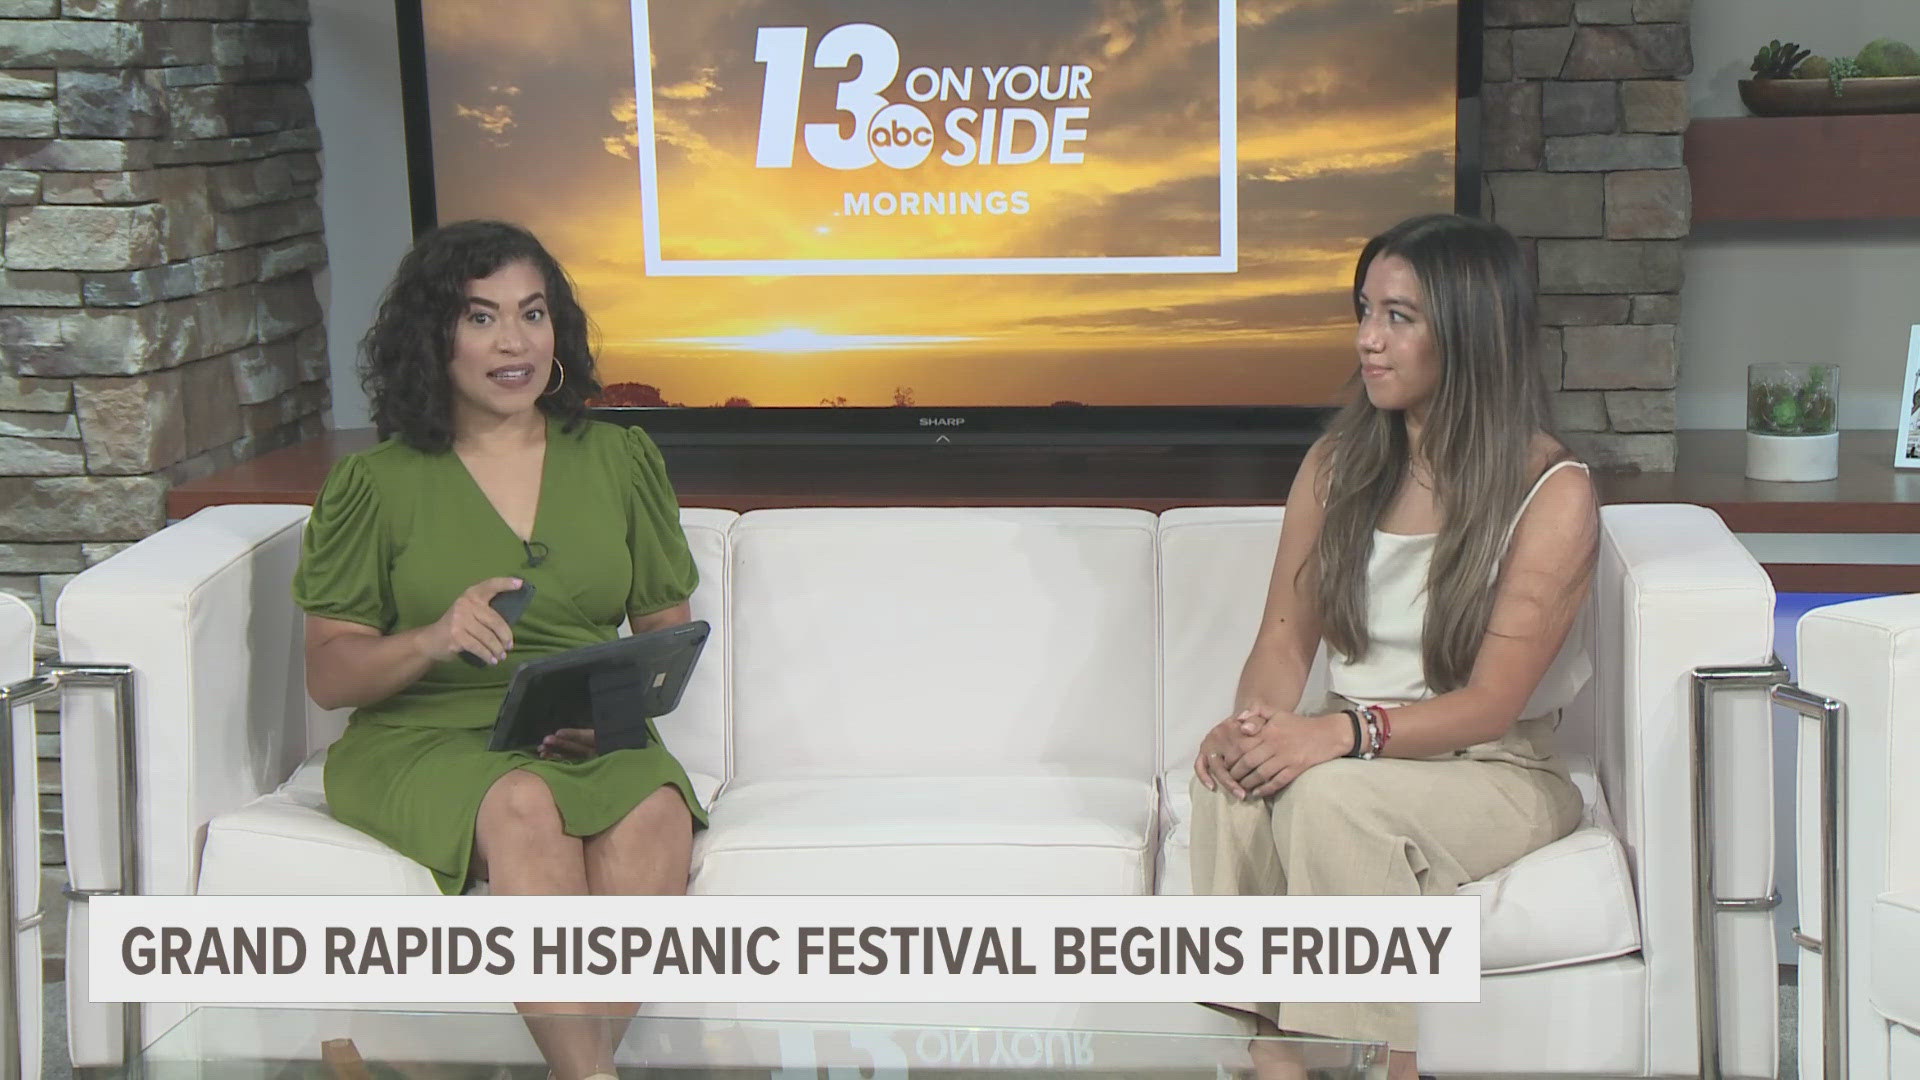 Gaby Cordova with the Hispanic Center of West Michigan joins 13 On Your Side to talk about preparations for the upcoming Grand Rapids Hispanic Festival.